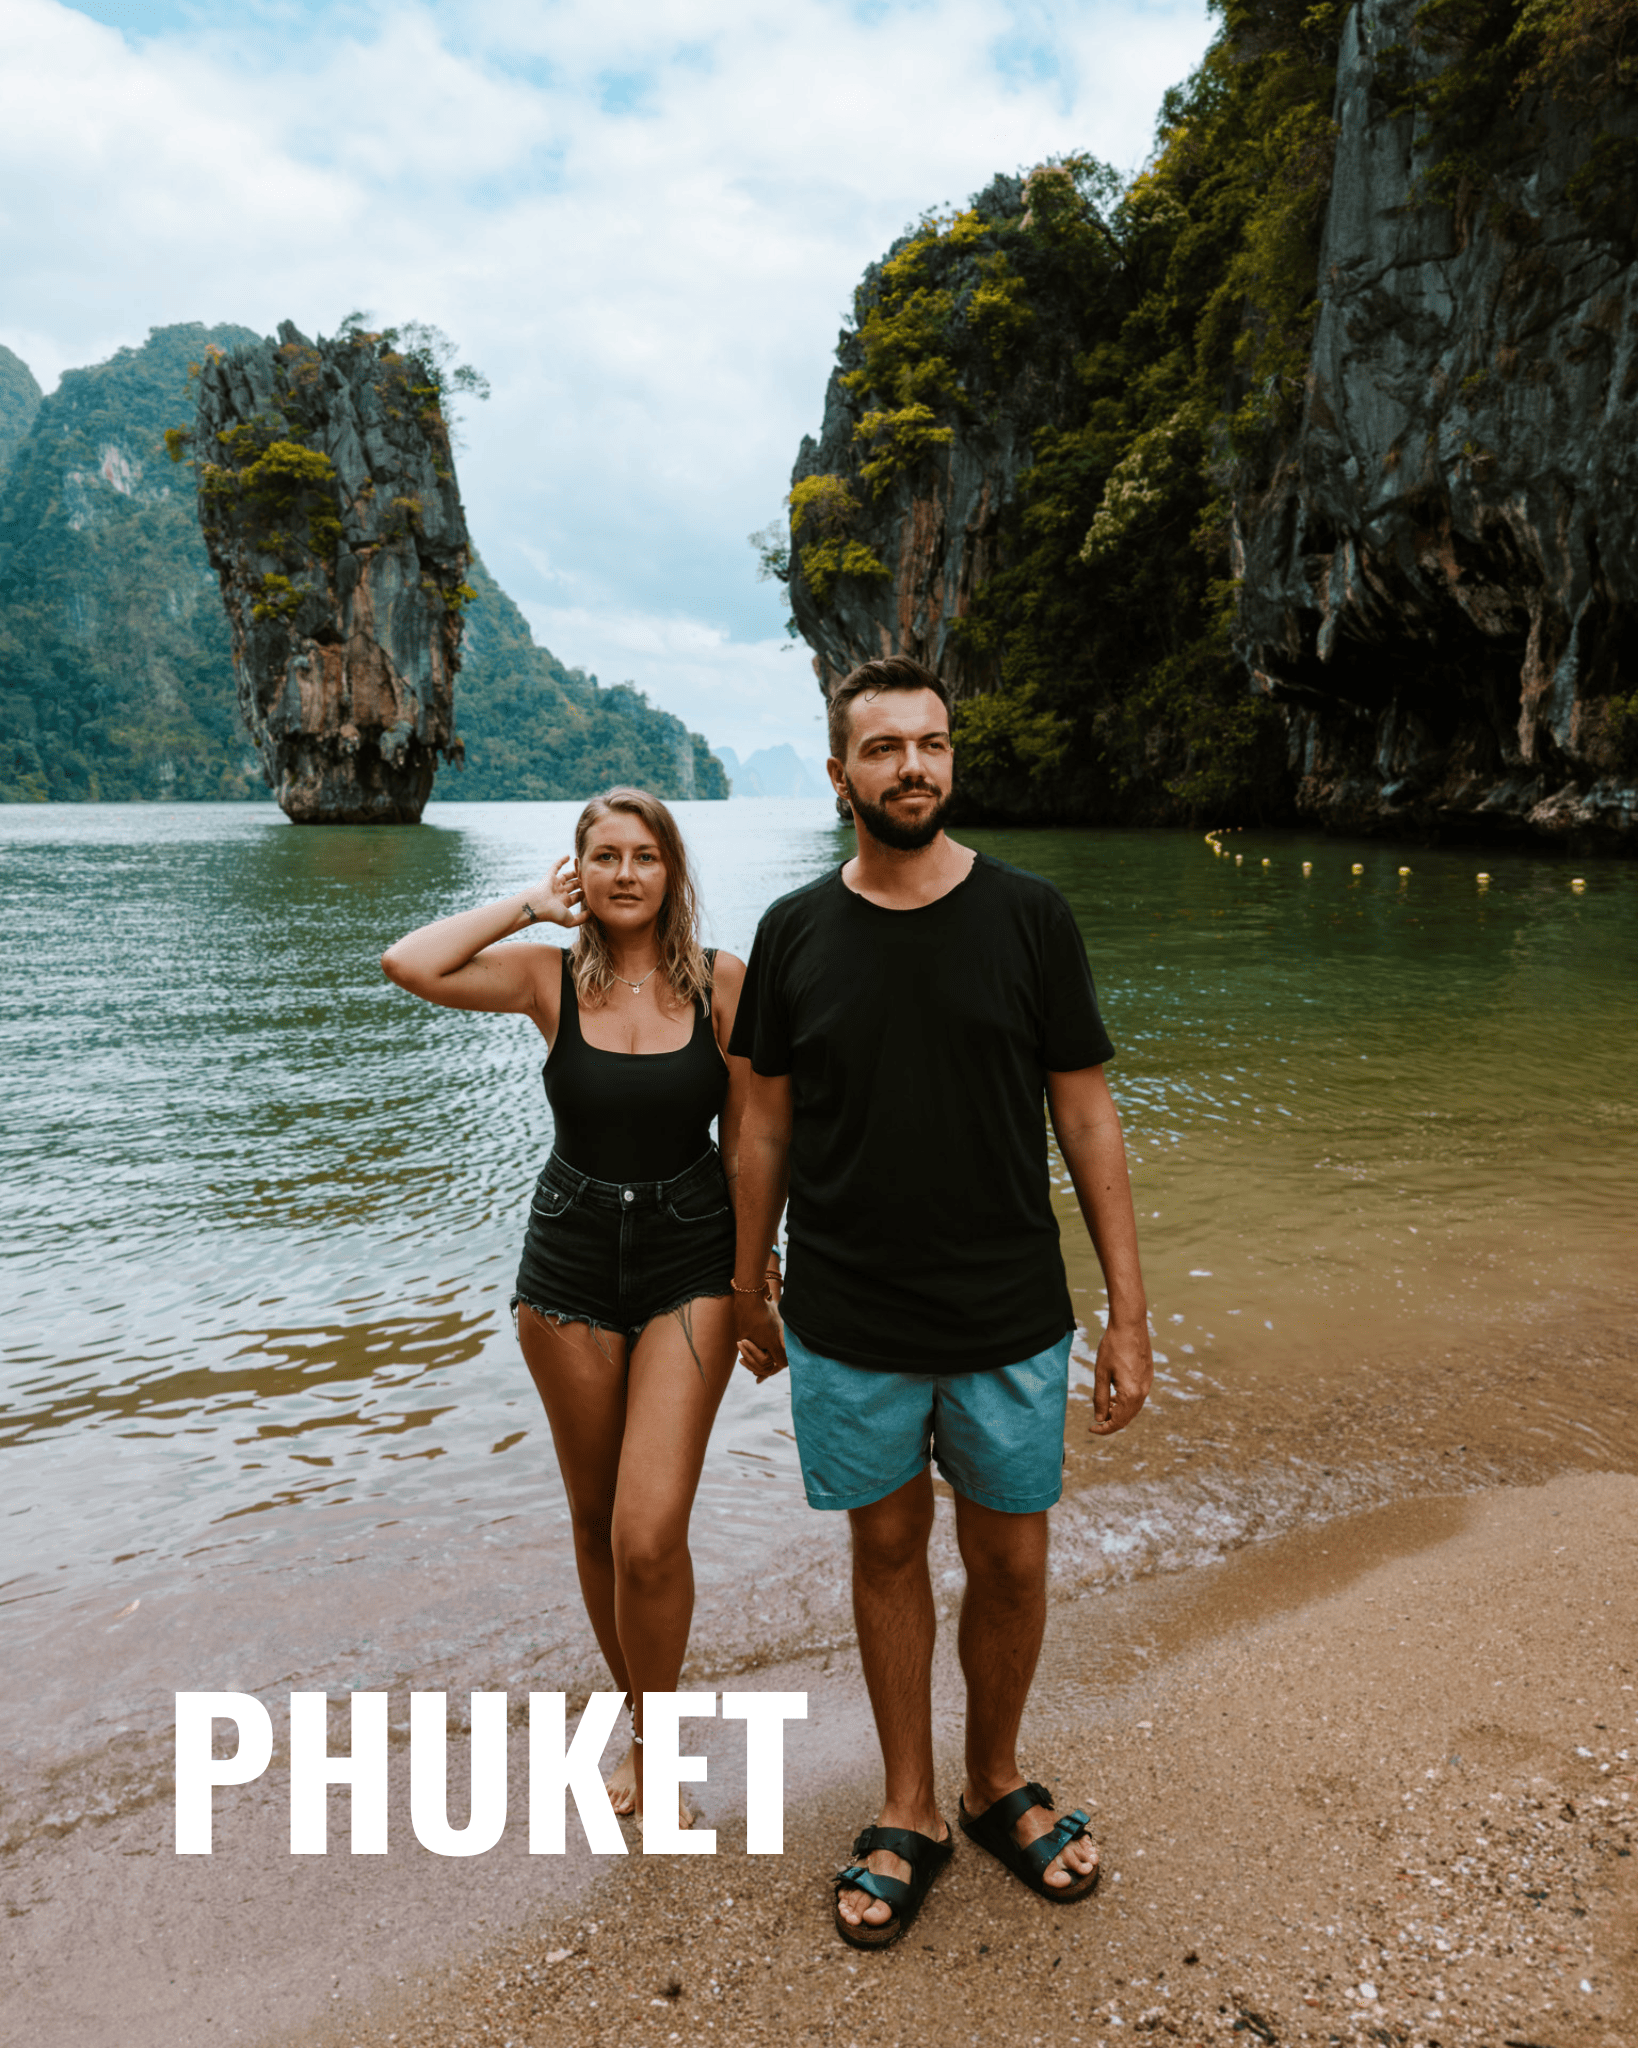 Phuket, Thailand: 8 Best Things to Do cairns